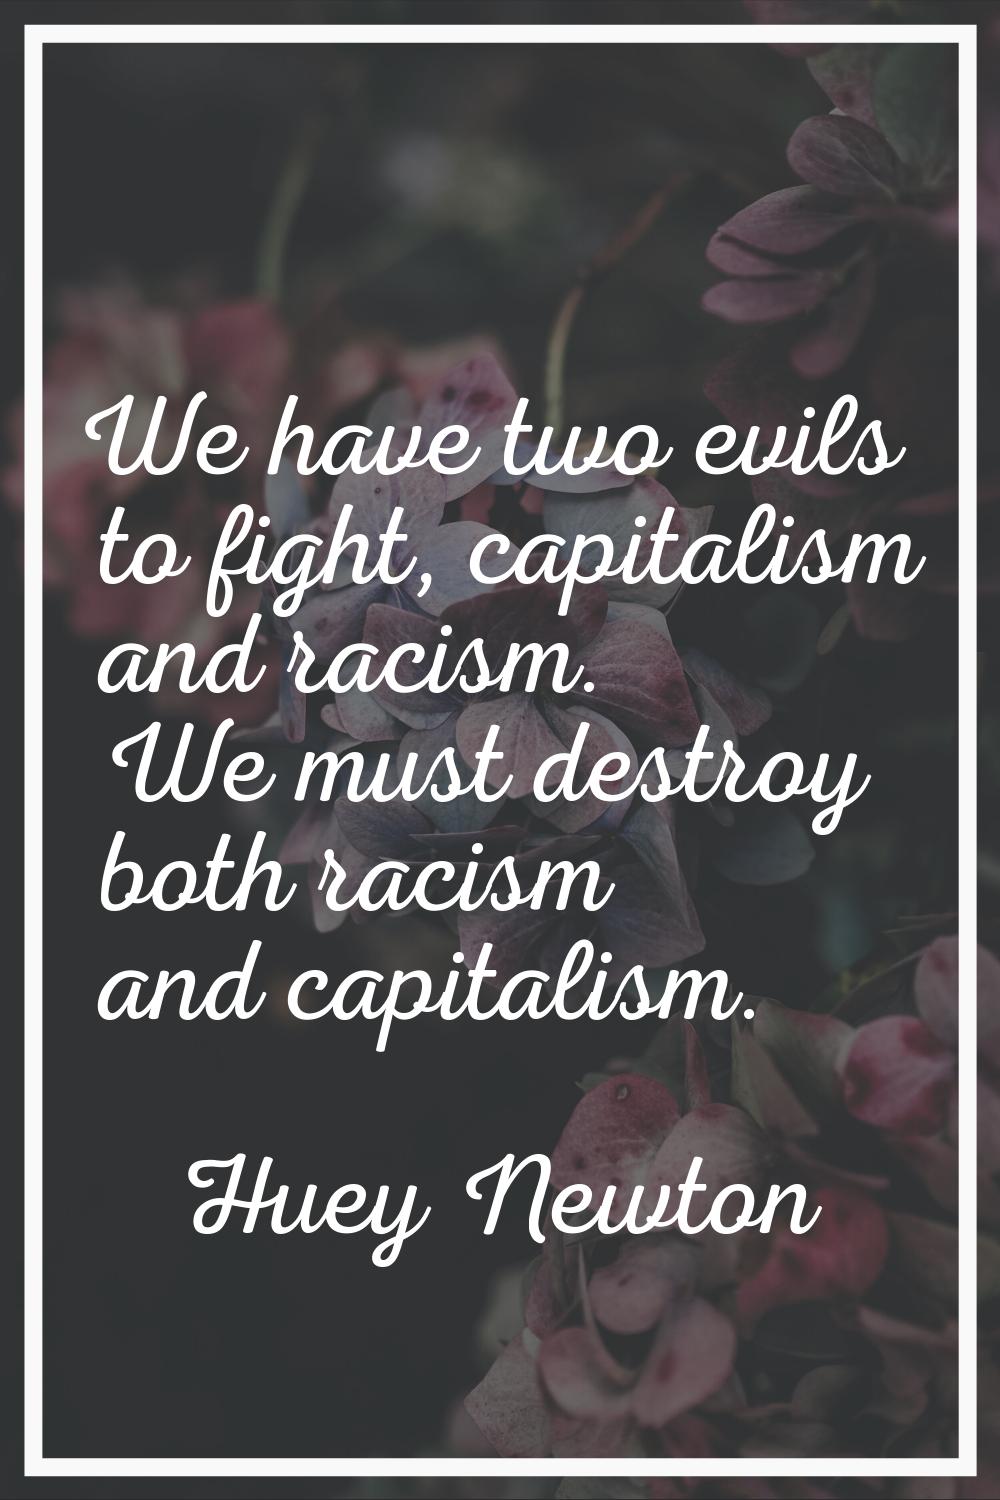 We have two evils to fight, capitalism and racism. We must destroy both racism and capitalism.